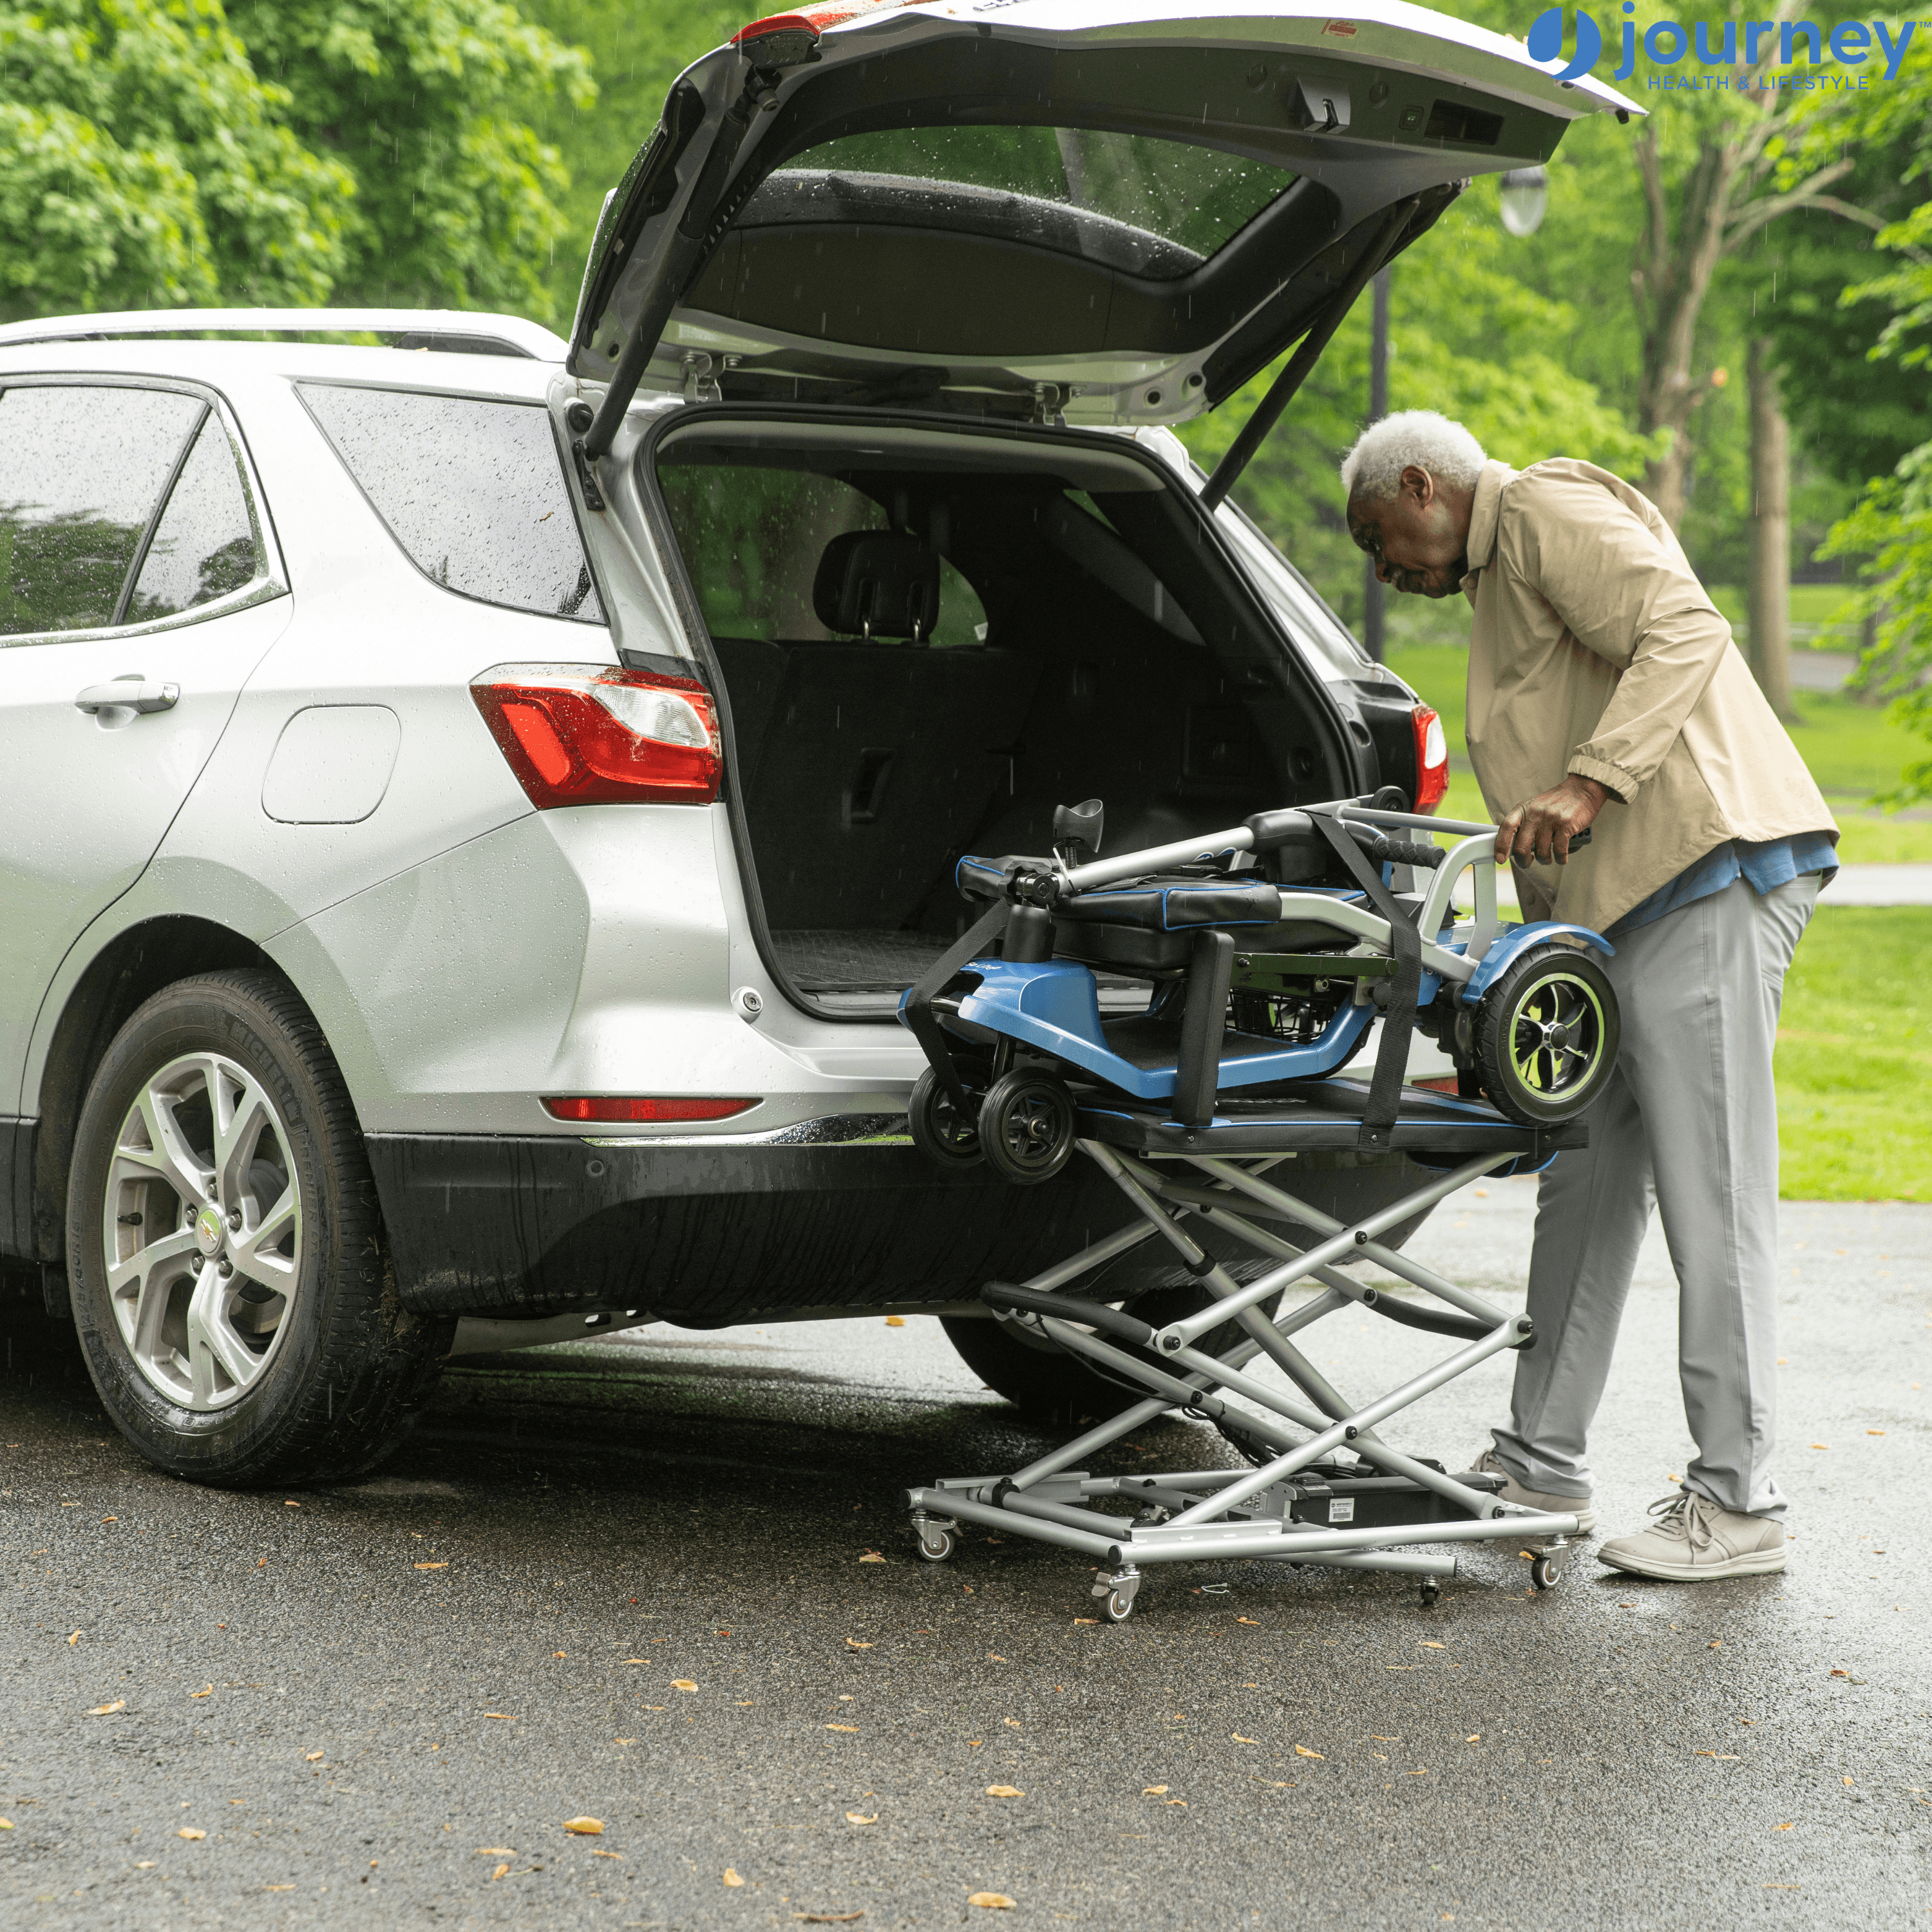 Journey So Lite Portable Vehicle Lift - Mobility Angel